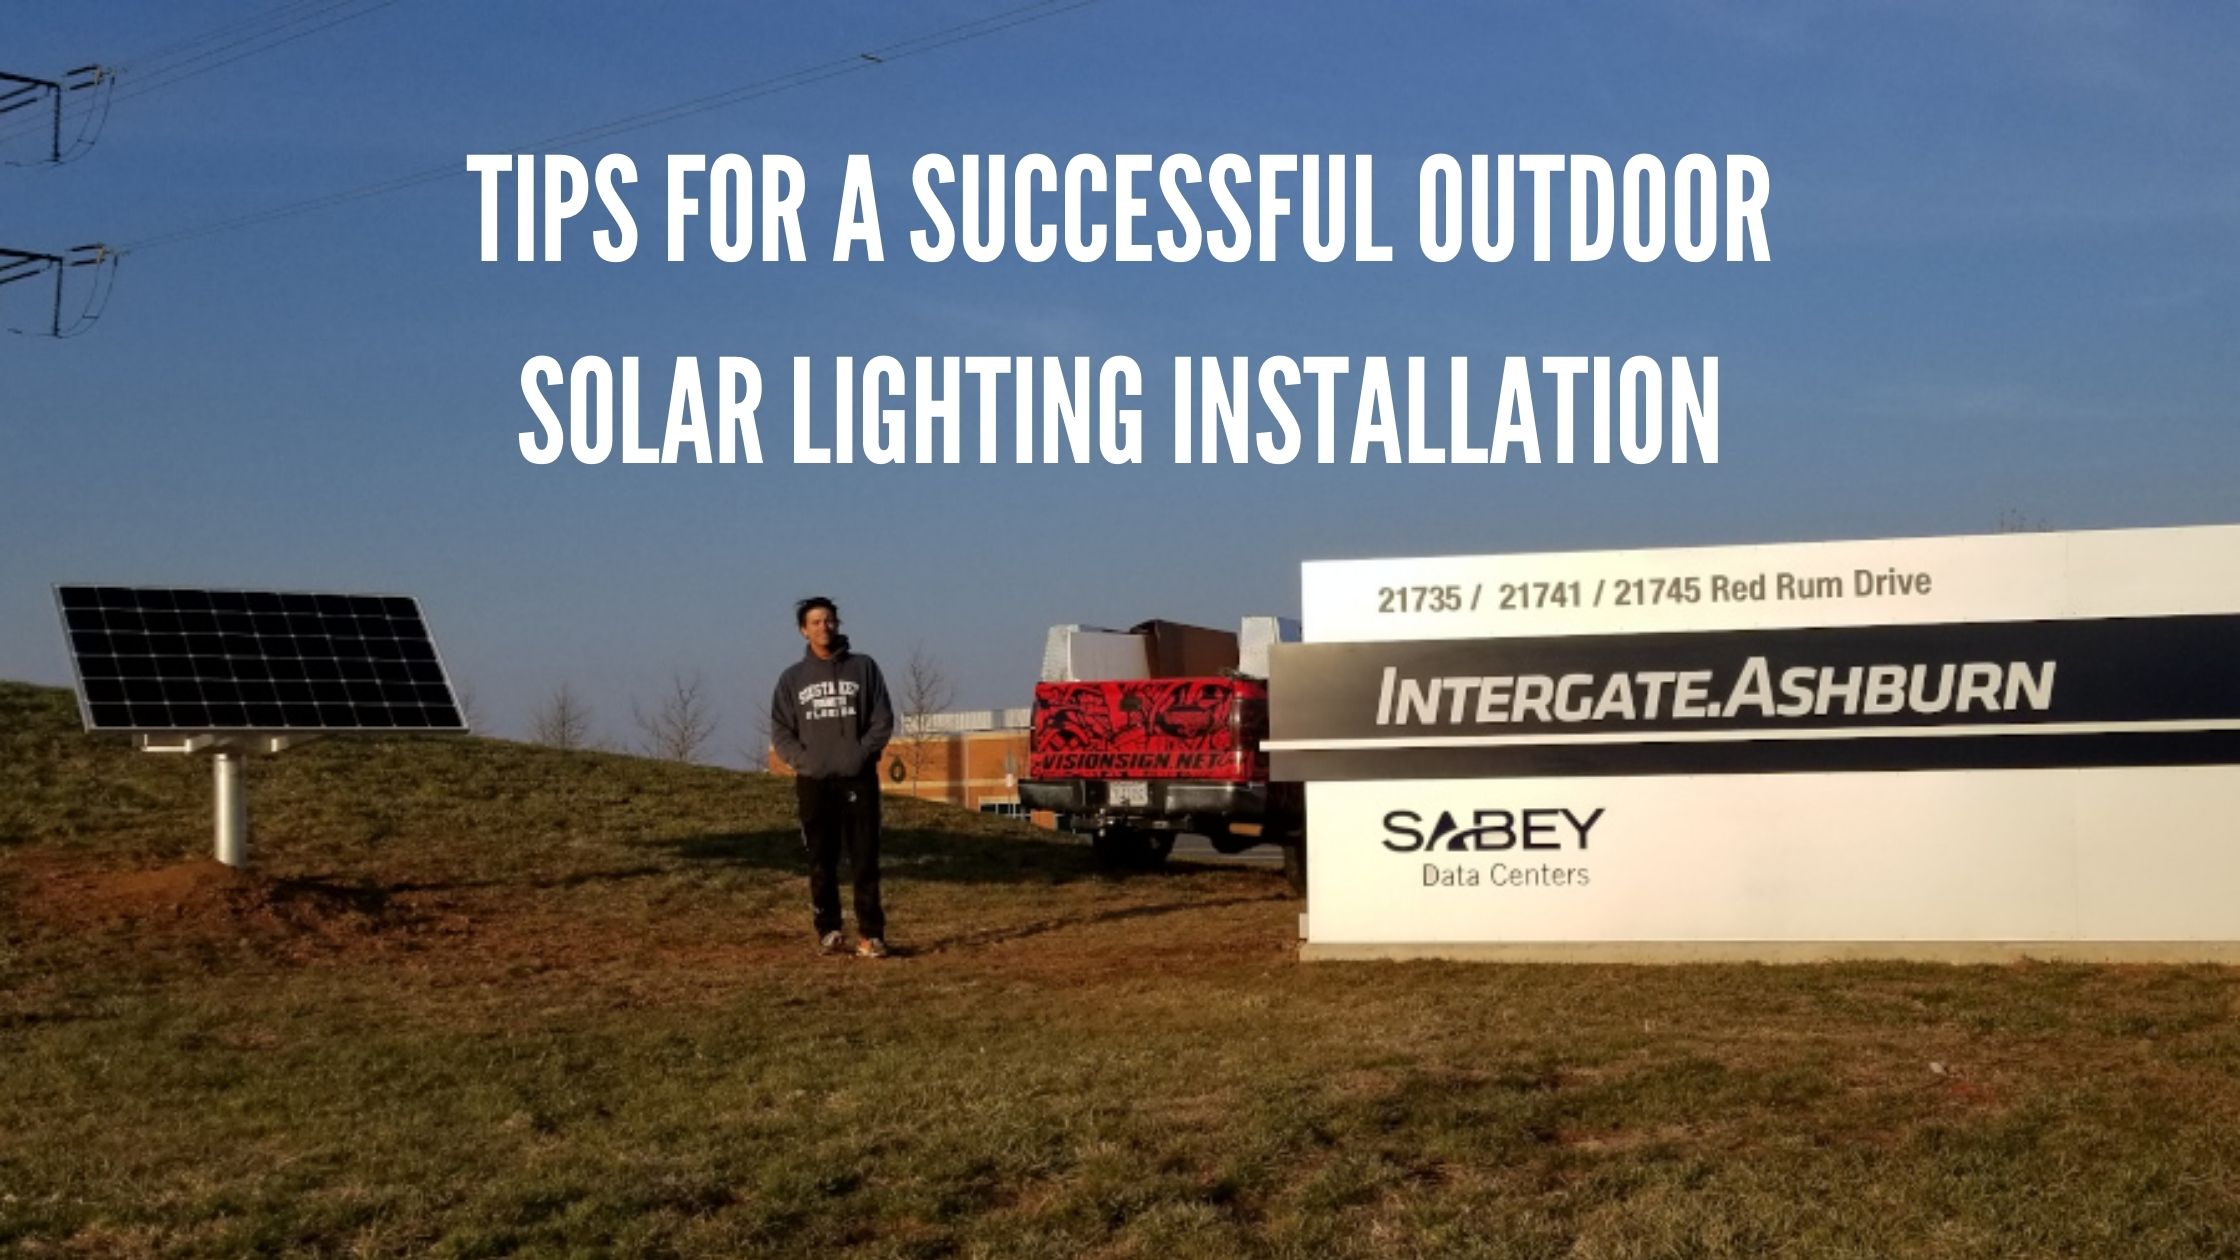 Tips for A Successful Outdoor Solar Lighting Installation